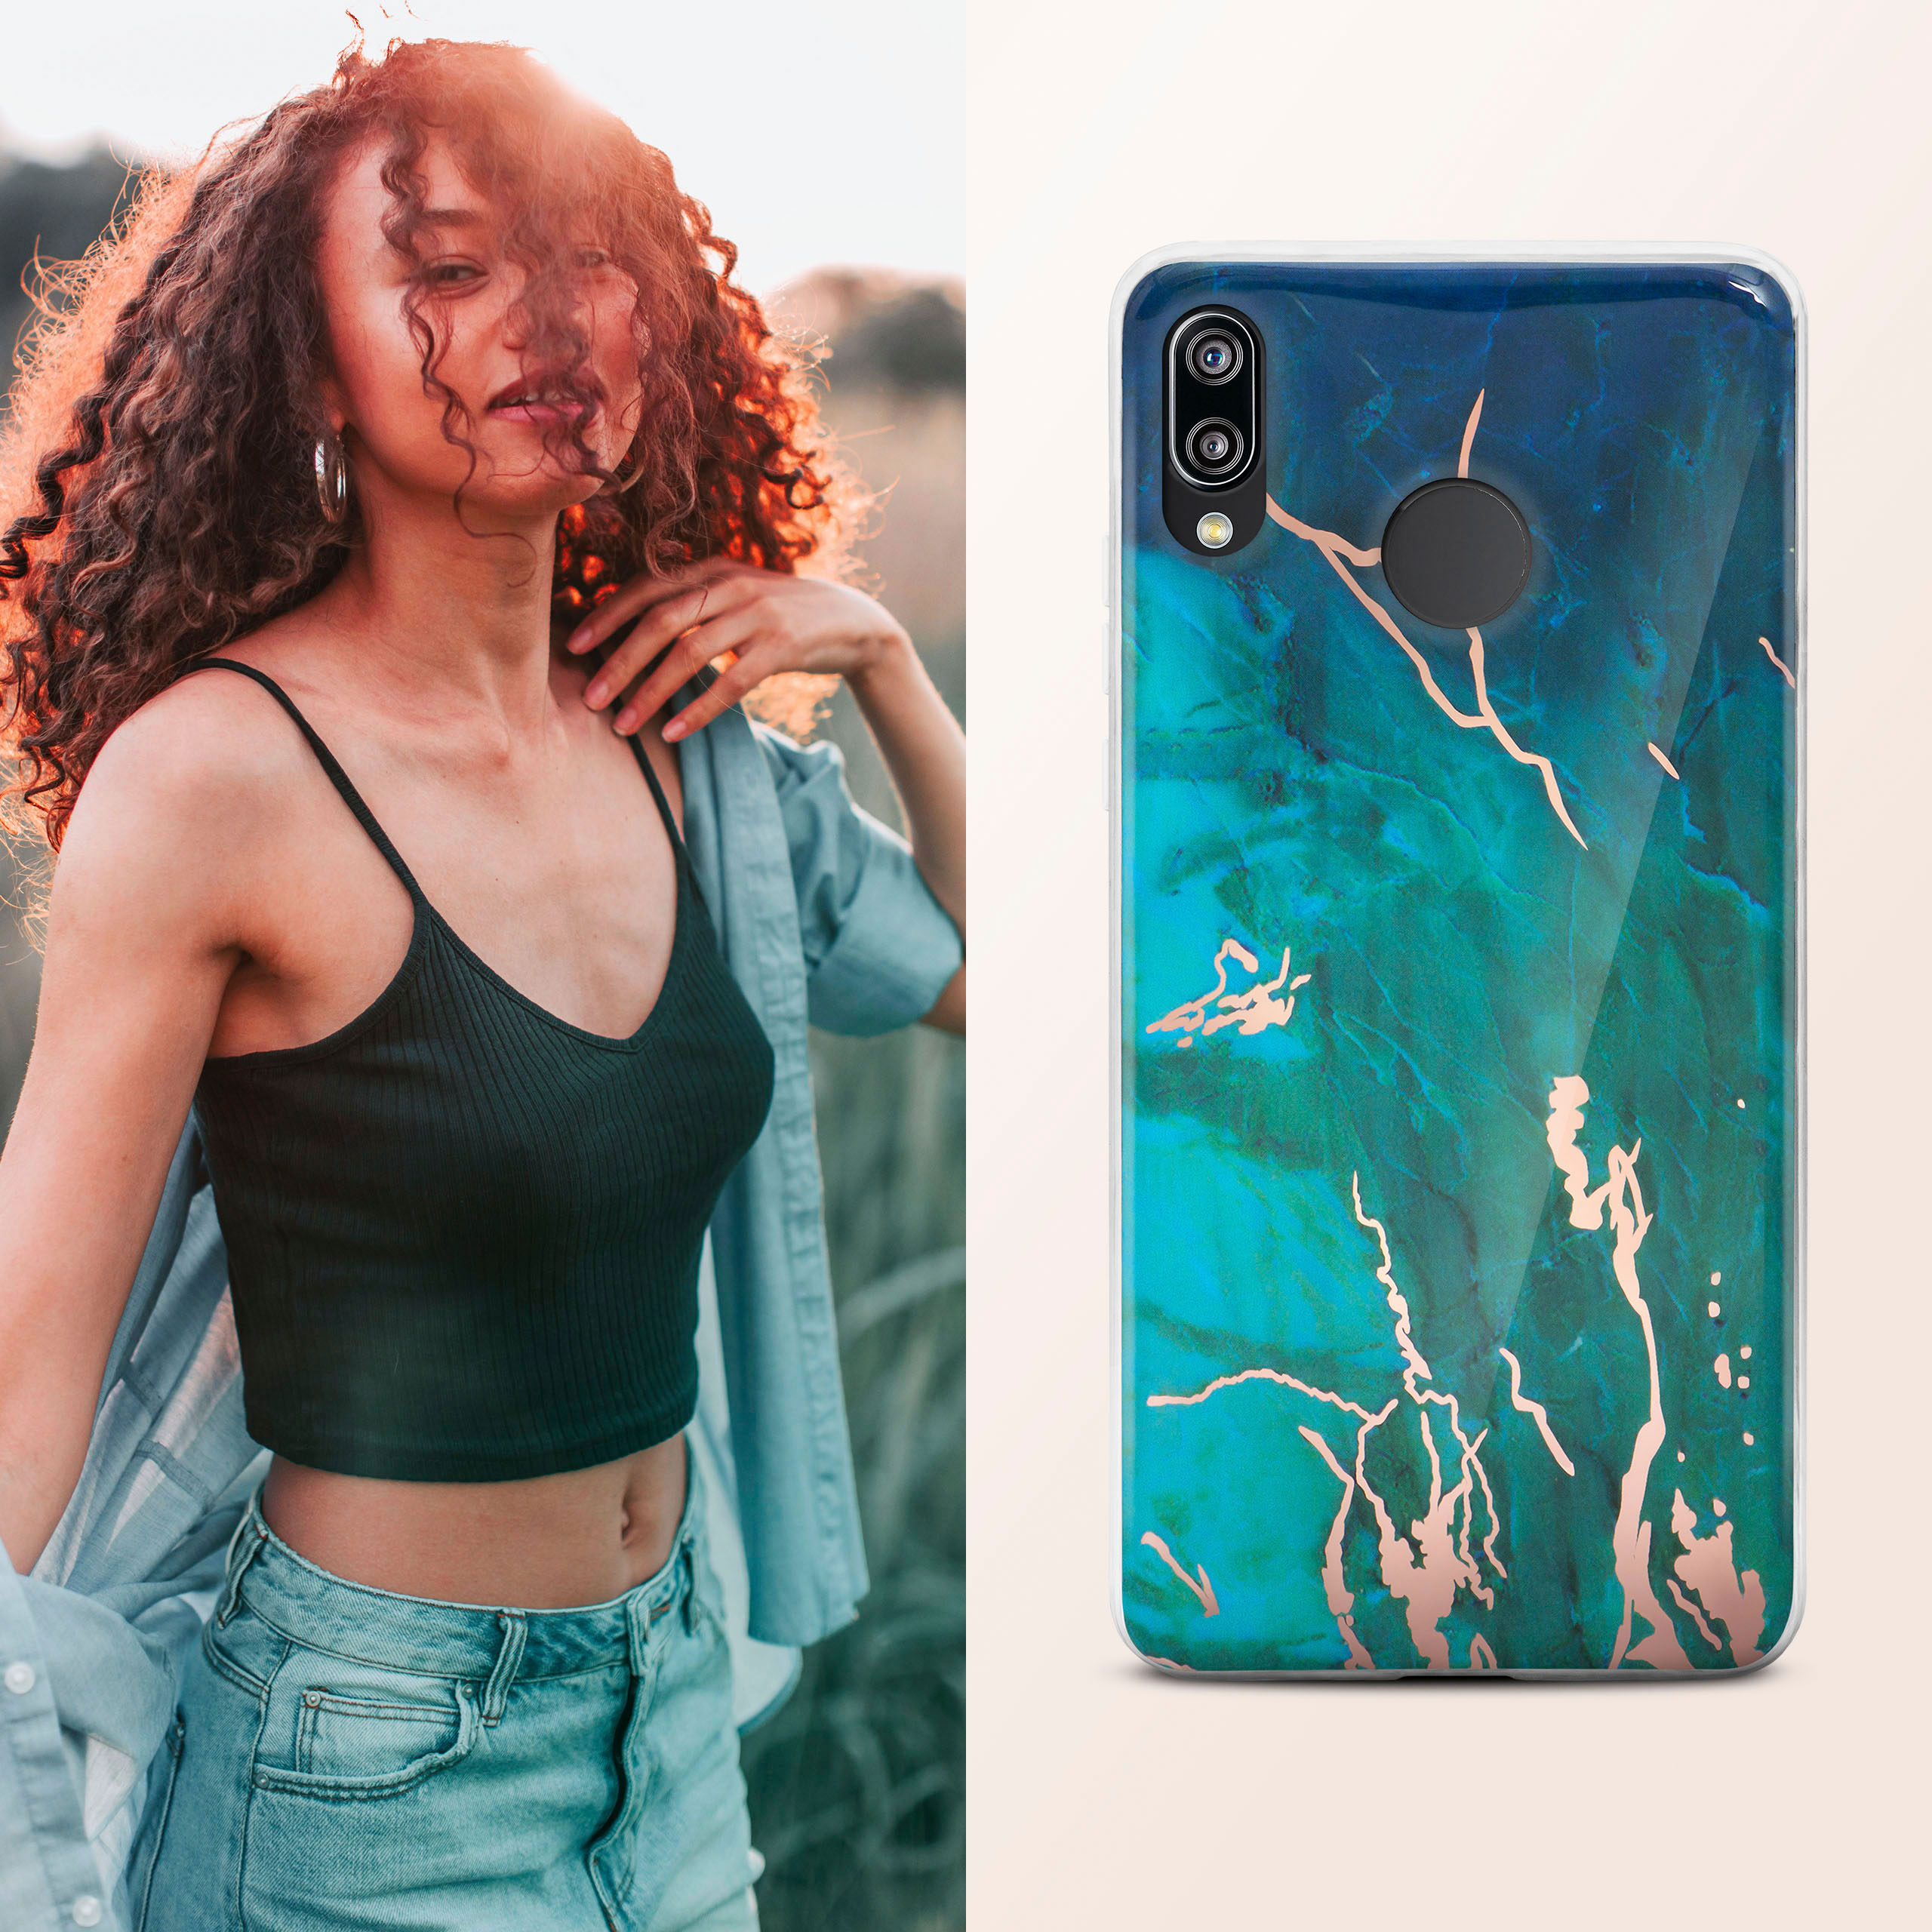 ONEFLOW Sense Case, Backcover, Huawei, P20 Lite, Excitement